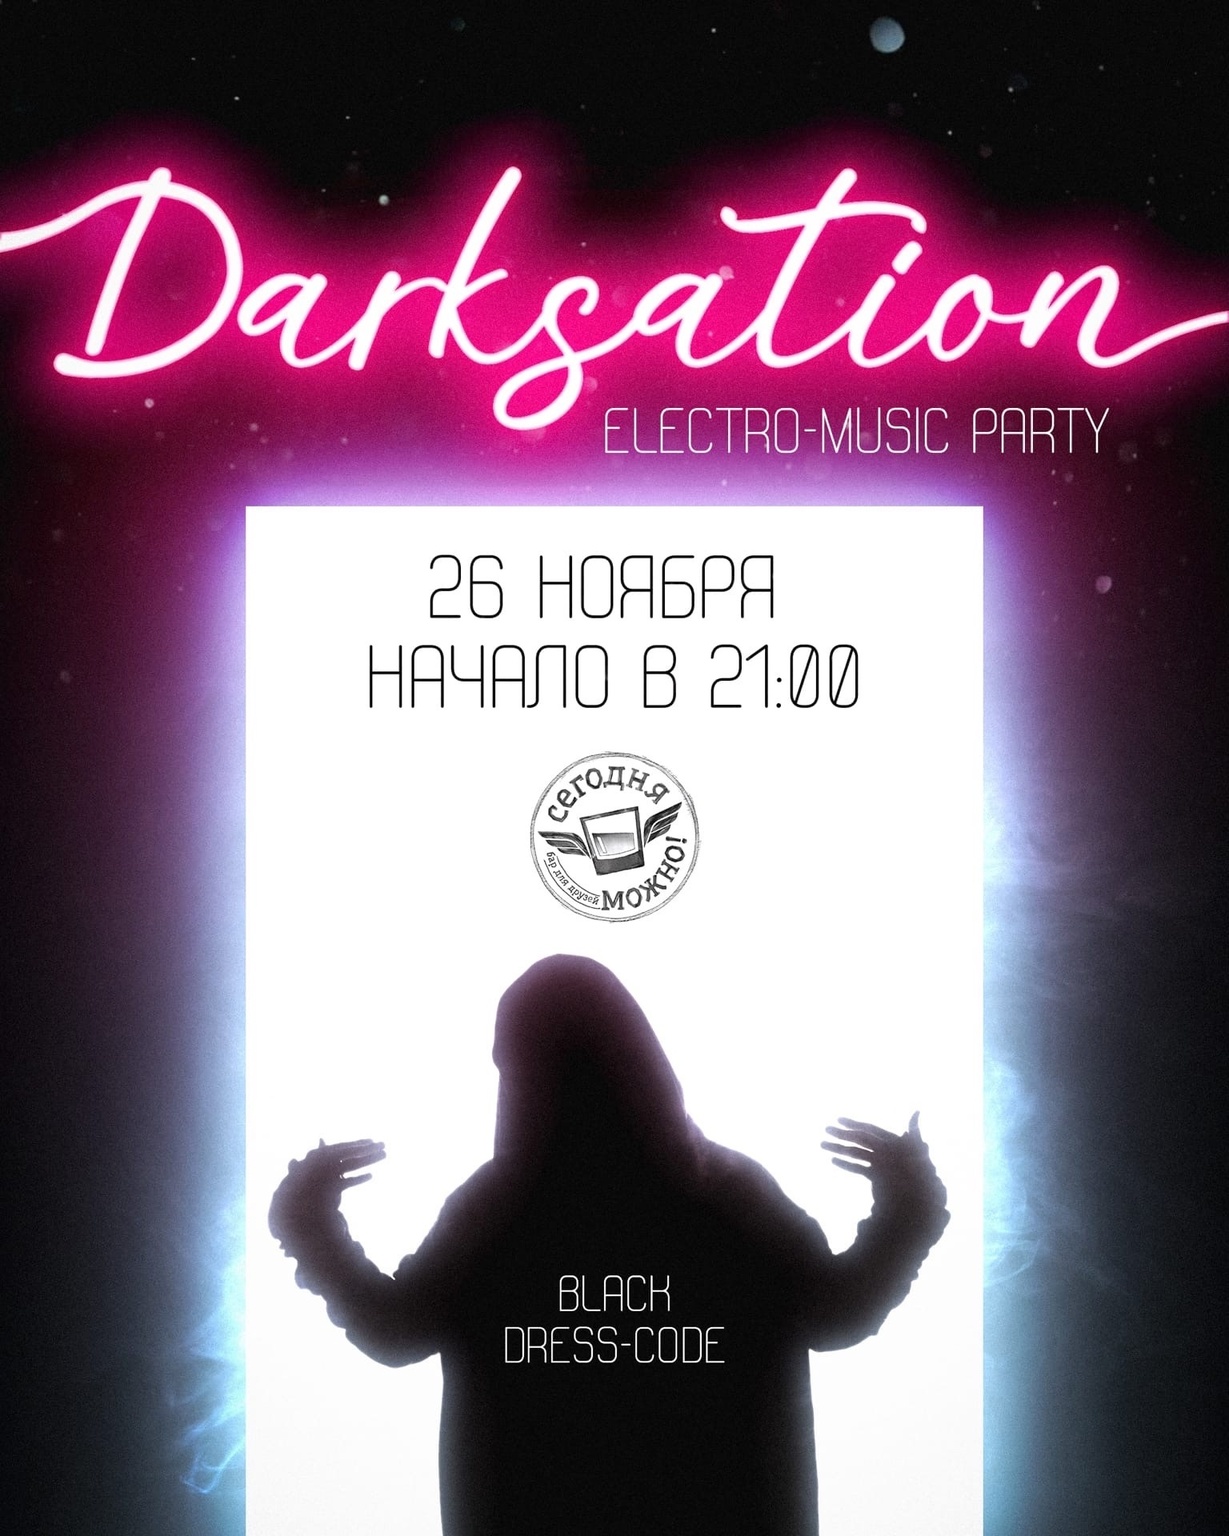 Darksation electro-music party